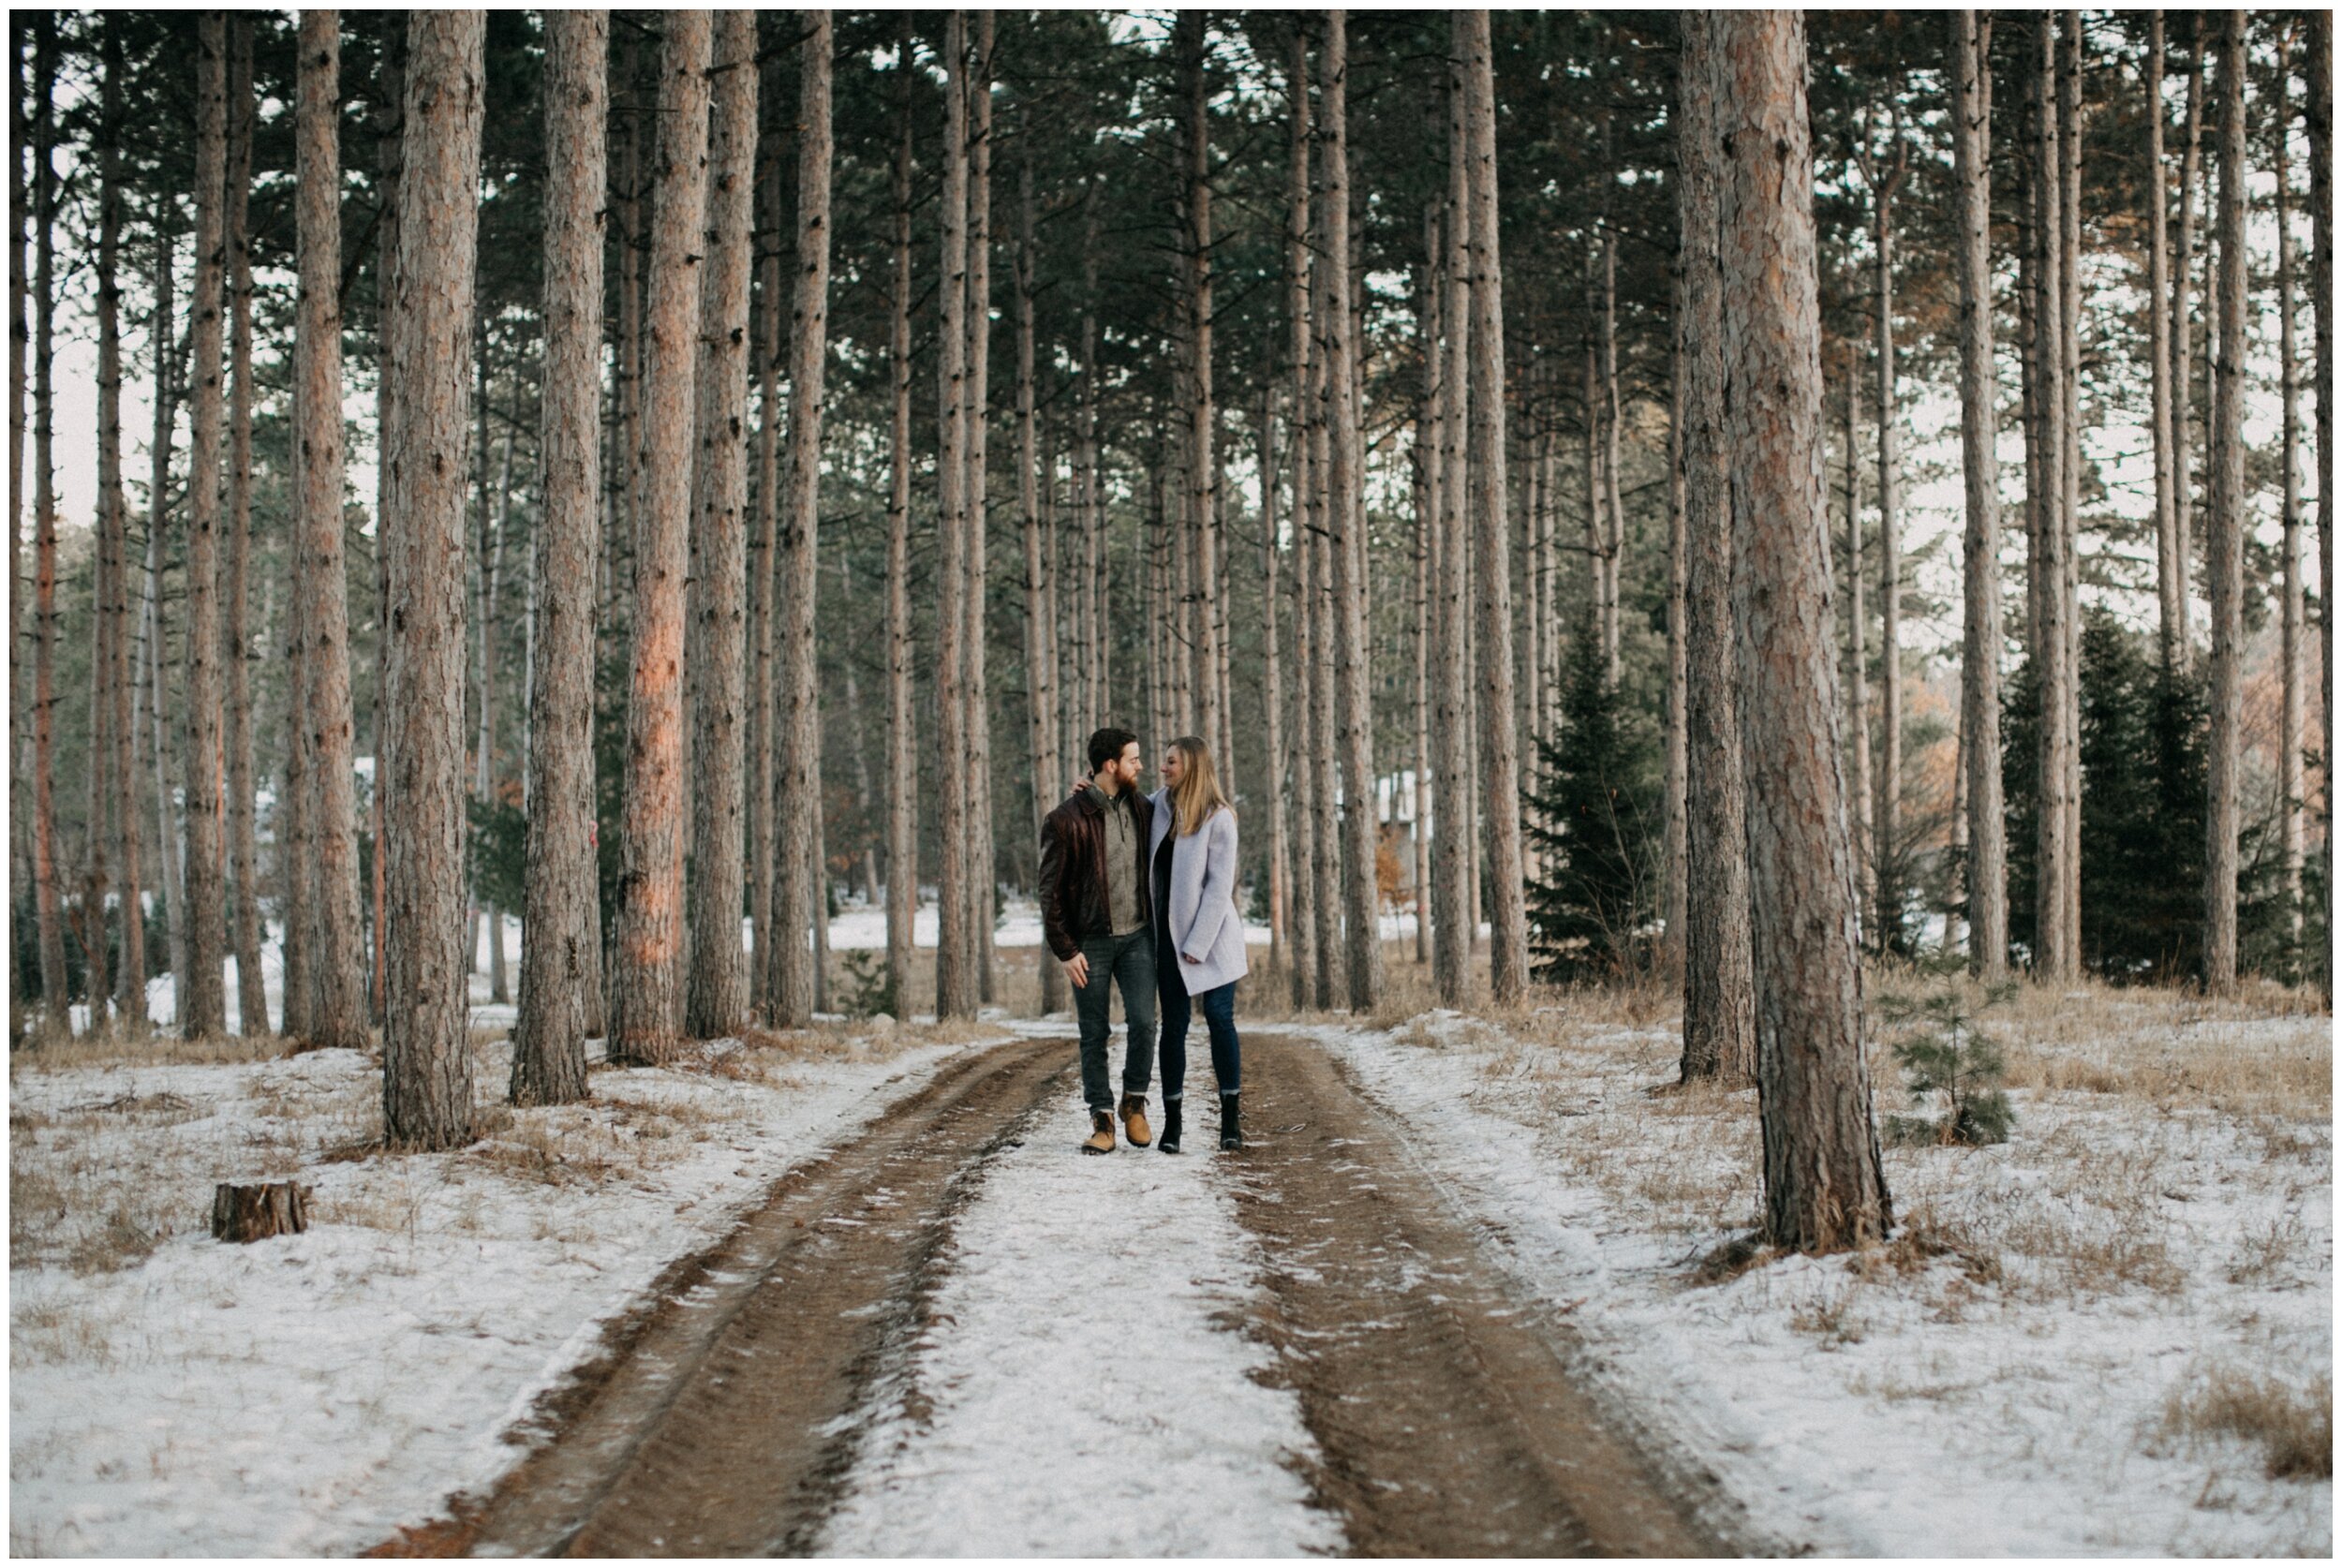 Couple walking through pine tree forest in Minnesota